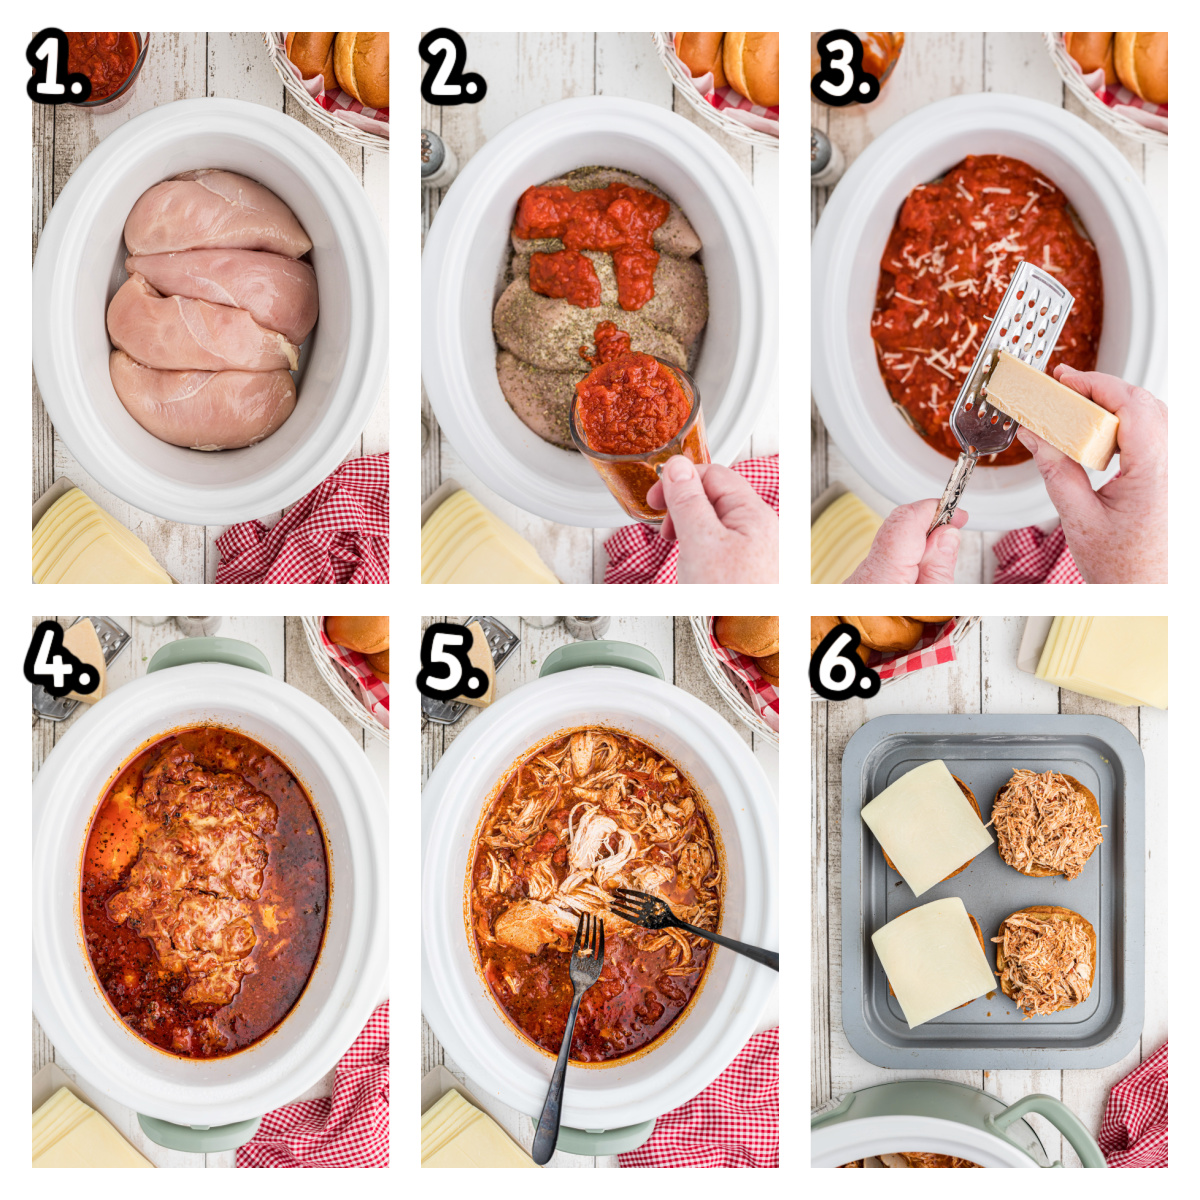 6 images of how to make chicken parmesan sandwiches in a slow cooker.